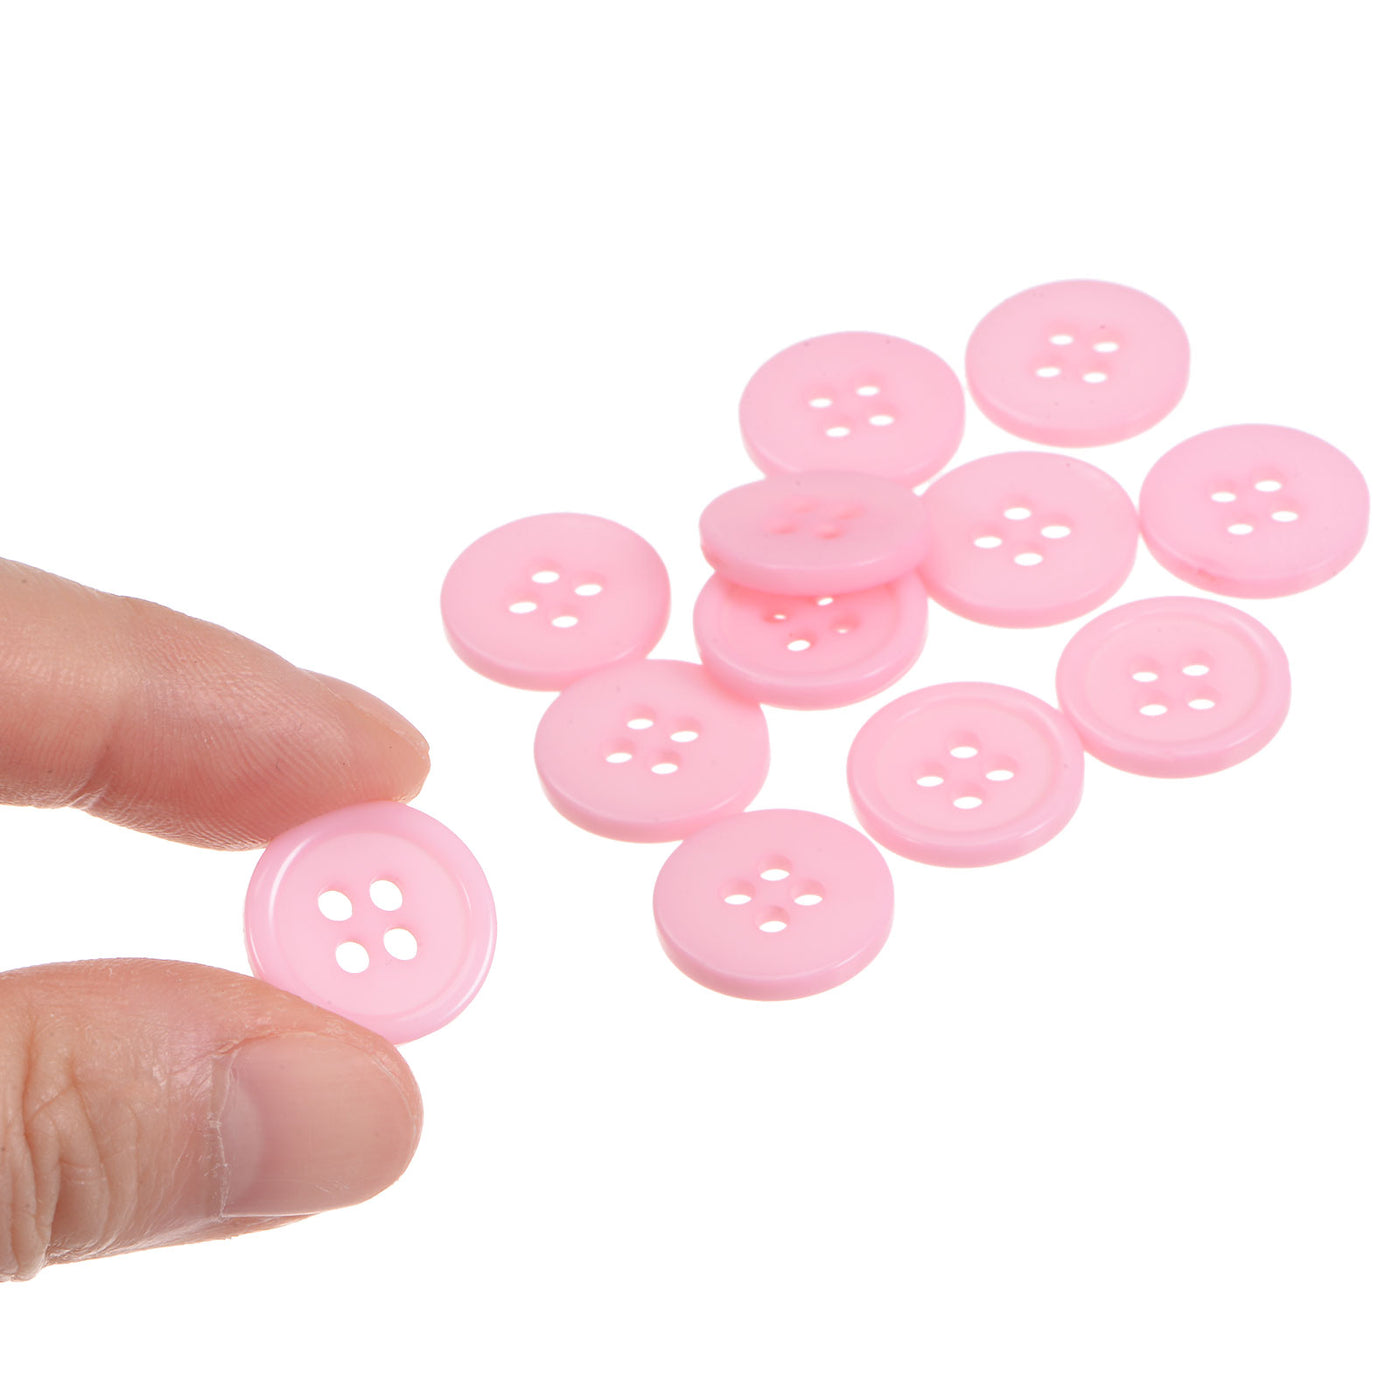 Harfington 160pcs 24L Sewing Buttons 5/8" Resin Round Flat 4-Hole Craft Buttons, Pink